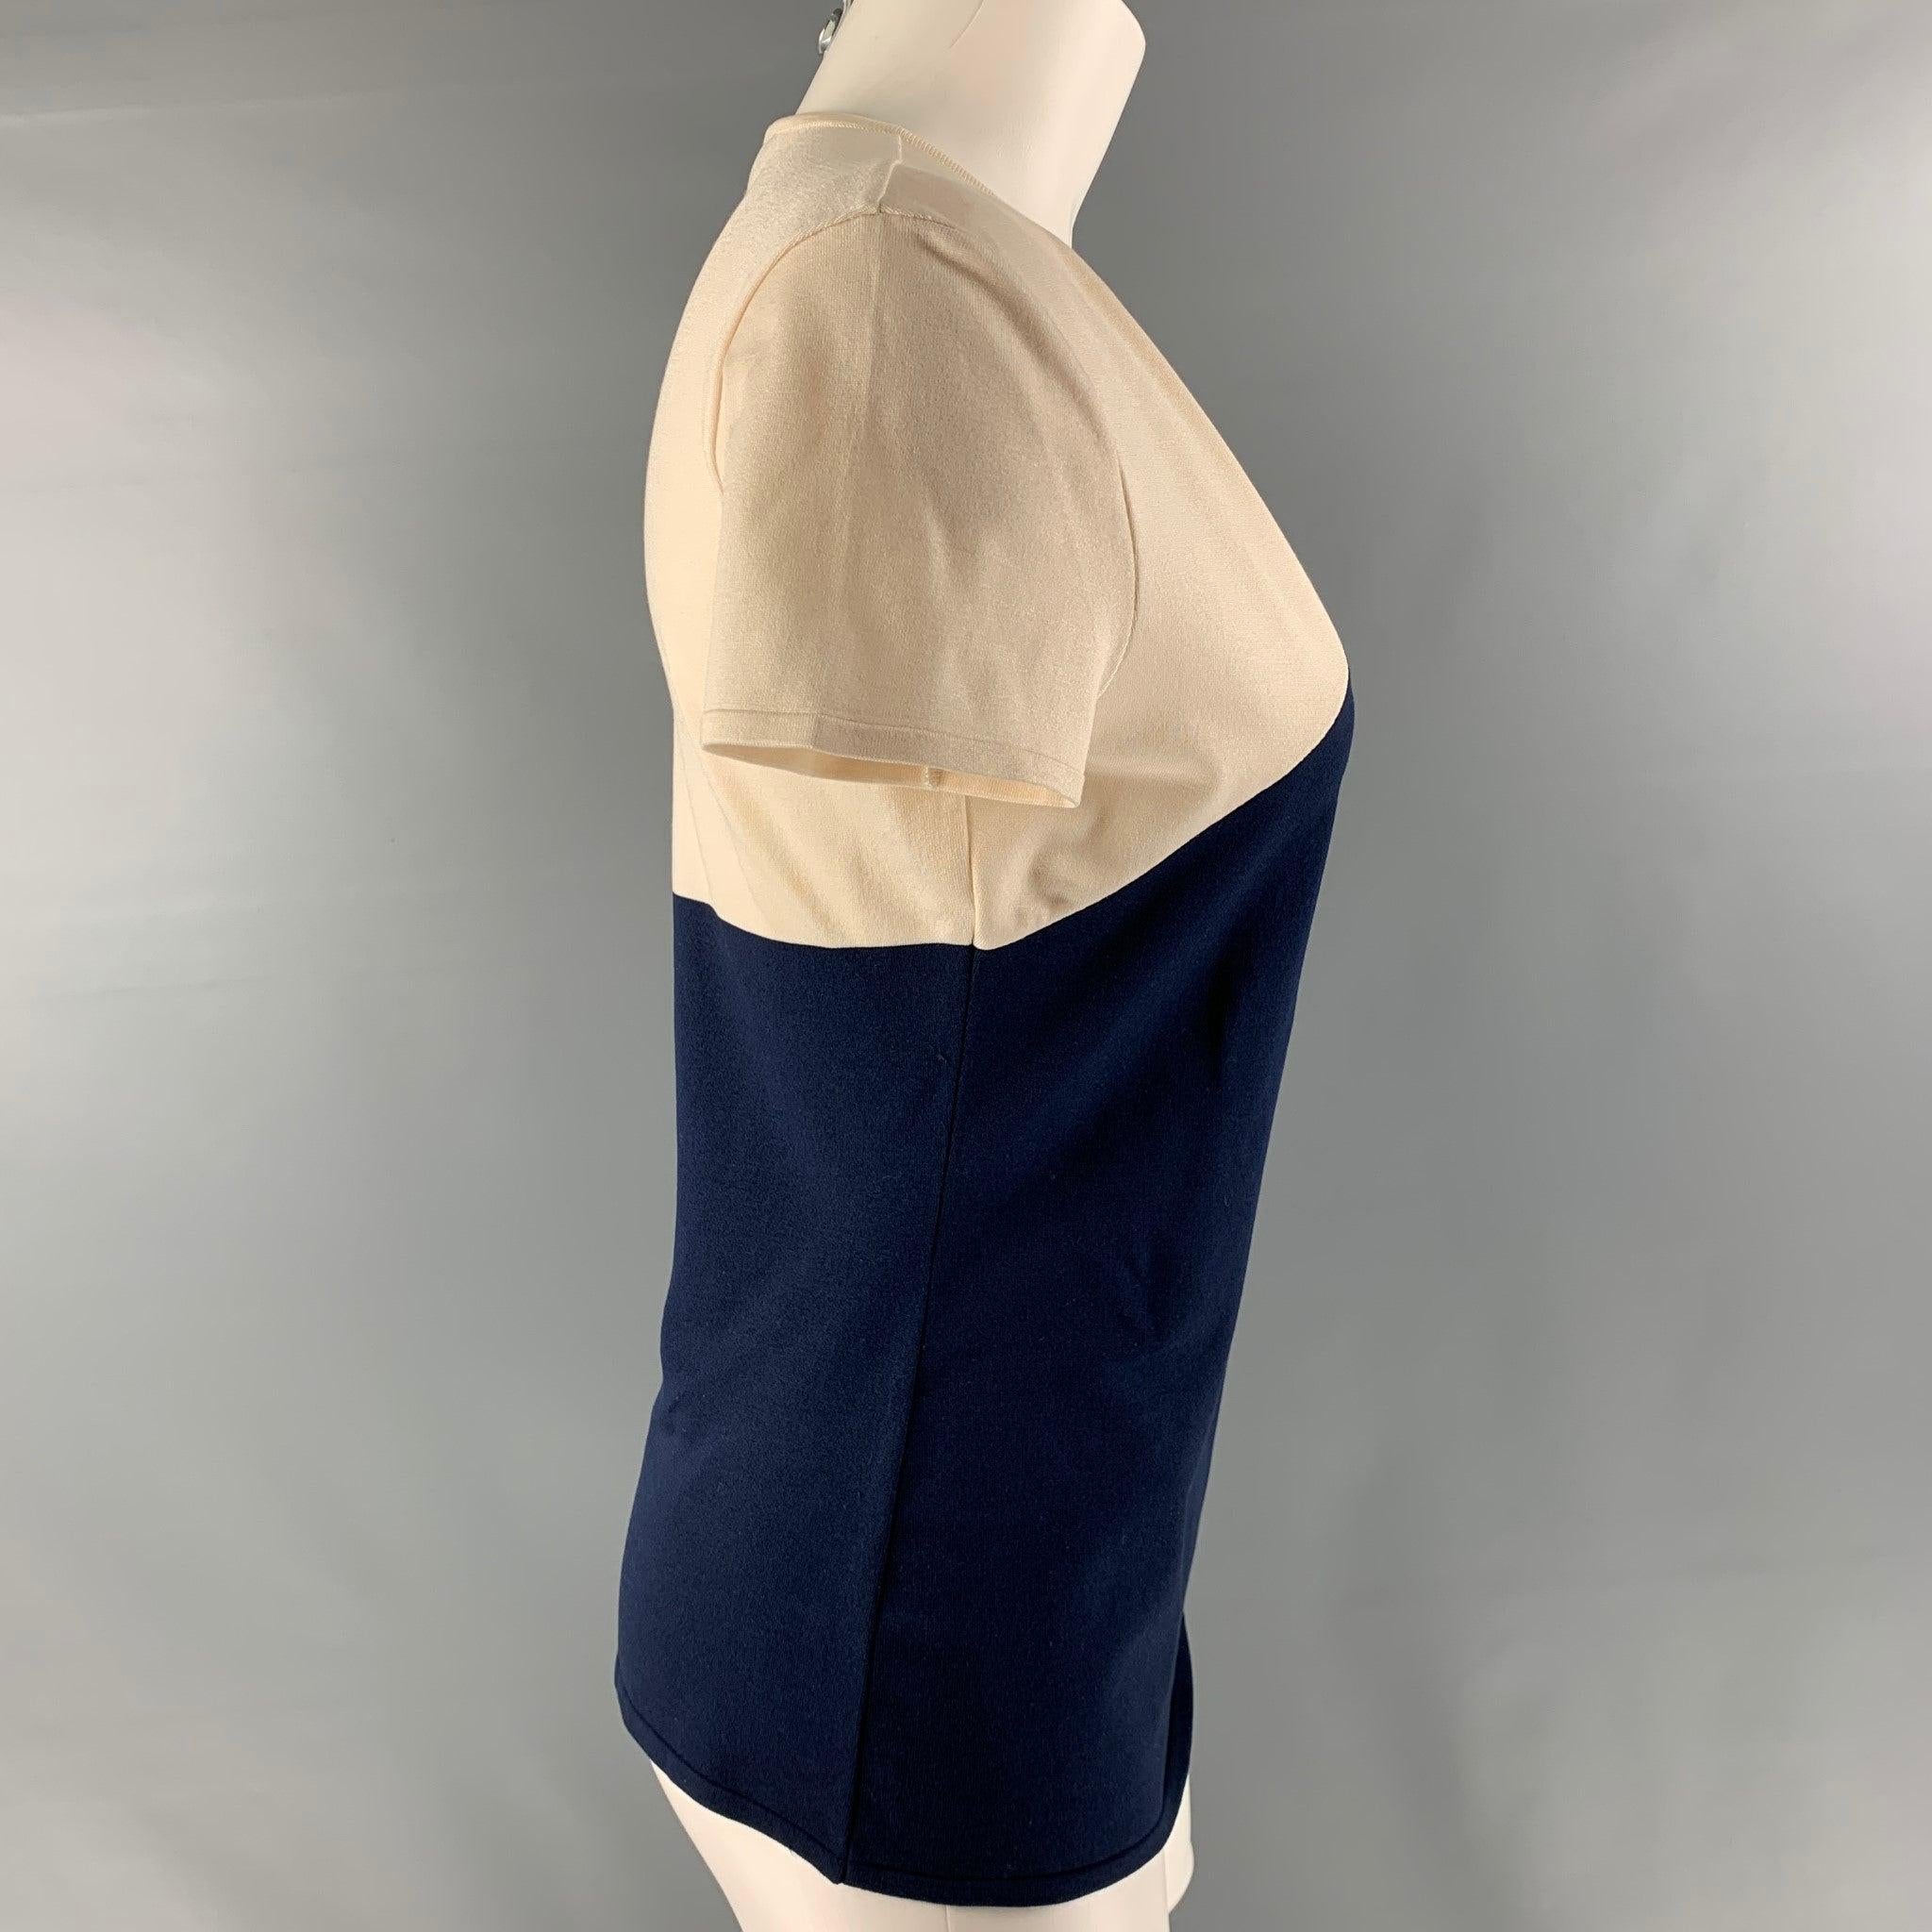 RALPH LAUREN 'COLLECTION by' short sleeve pullover comes in a cream and navy silk blend jersey featuring a v-neck and color block style. Made in Italy.Excellent Pre-Owned Condition. 

Marked:   M 

Measurements: 
 
Shoulder: 17 inches Bust: 39